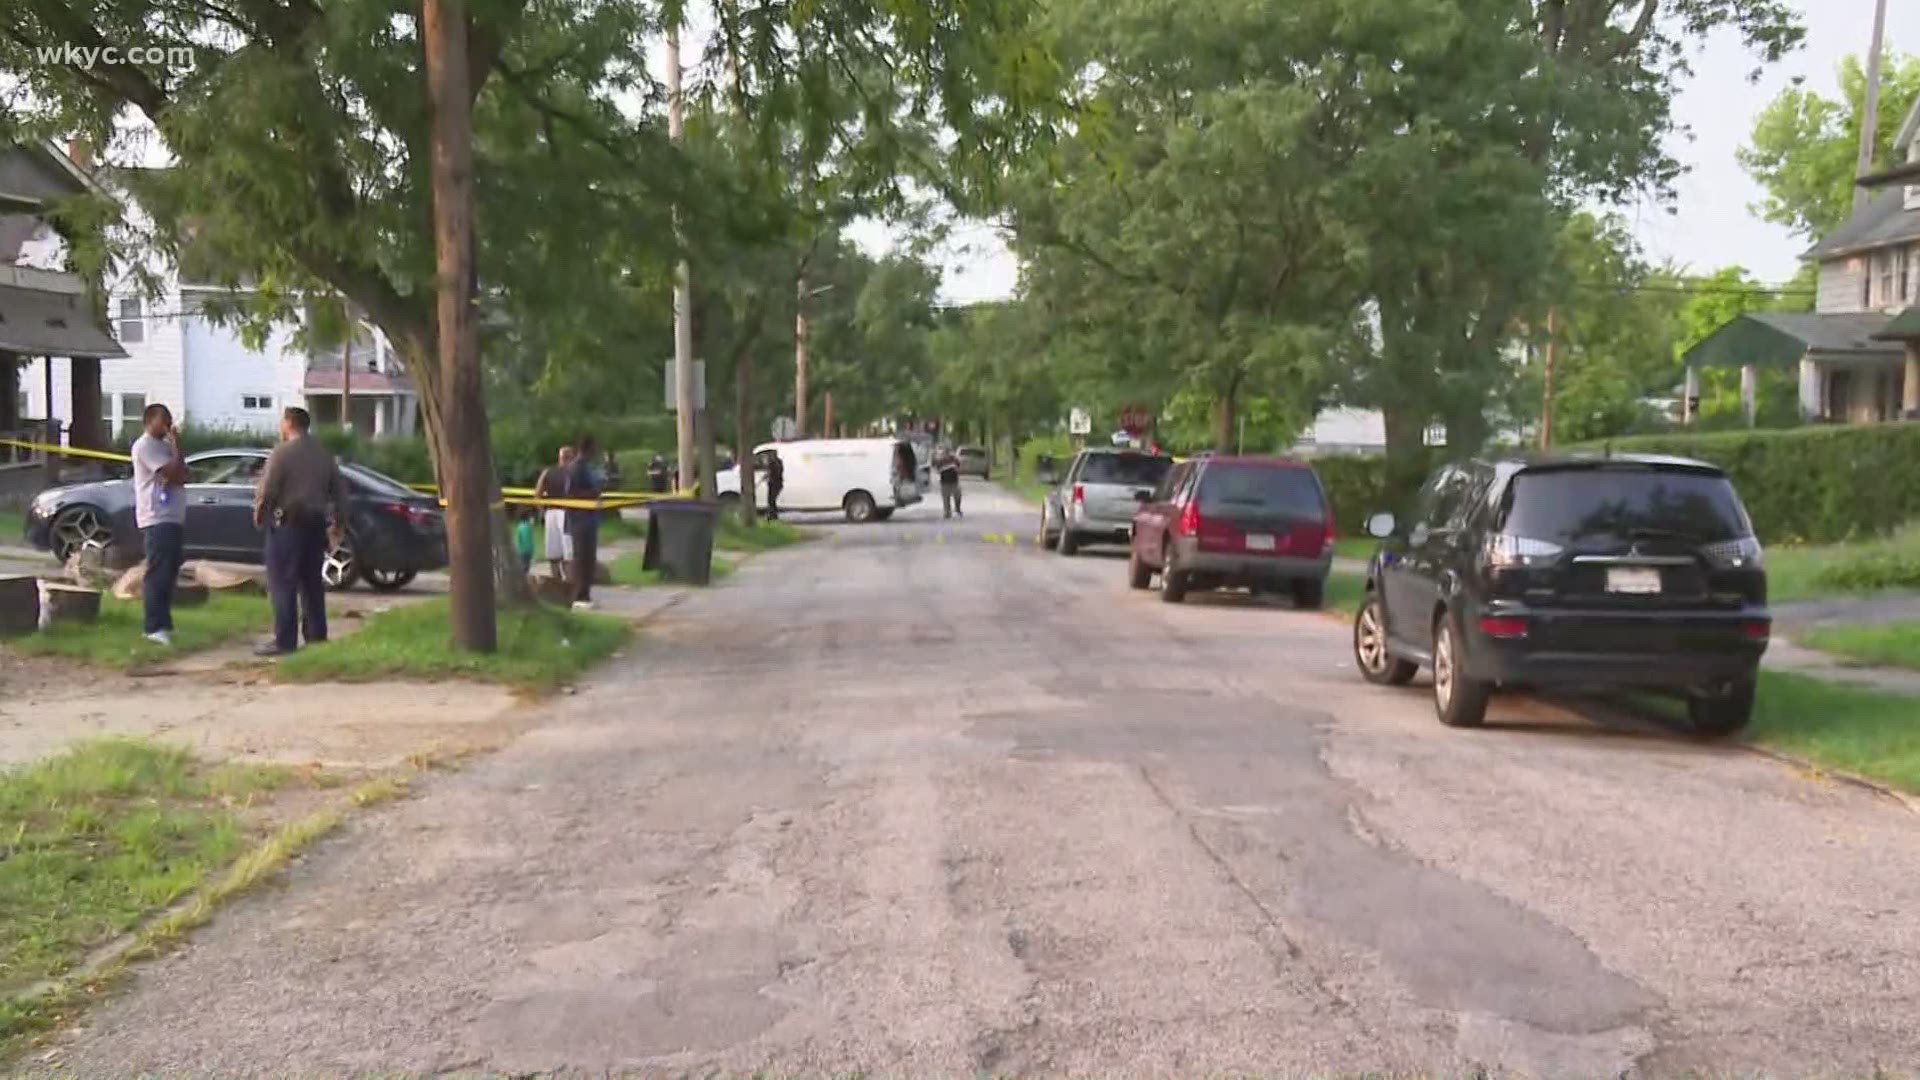 Police say the child was shot in the back on the 3200 block of East 117th Street. He was taken by ambulance to UH Rainbow Babies and Children's Hospital.